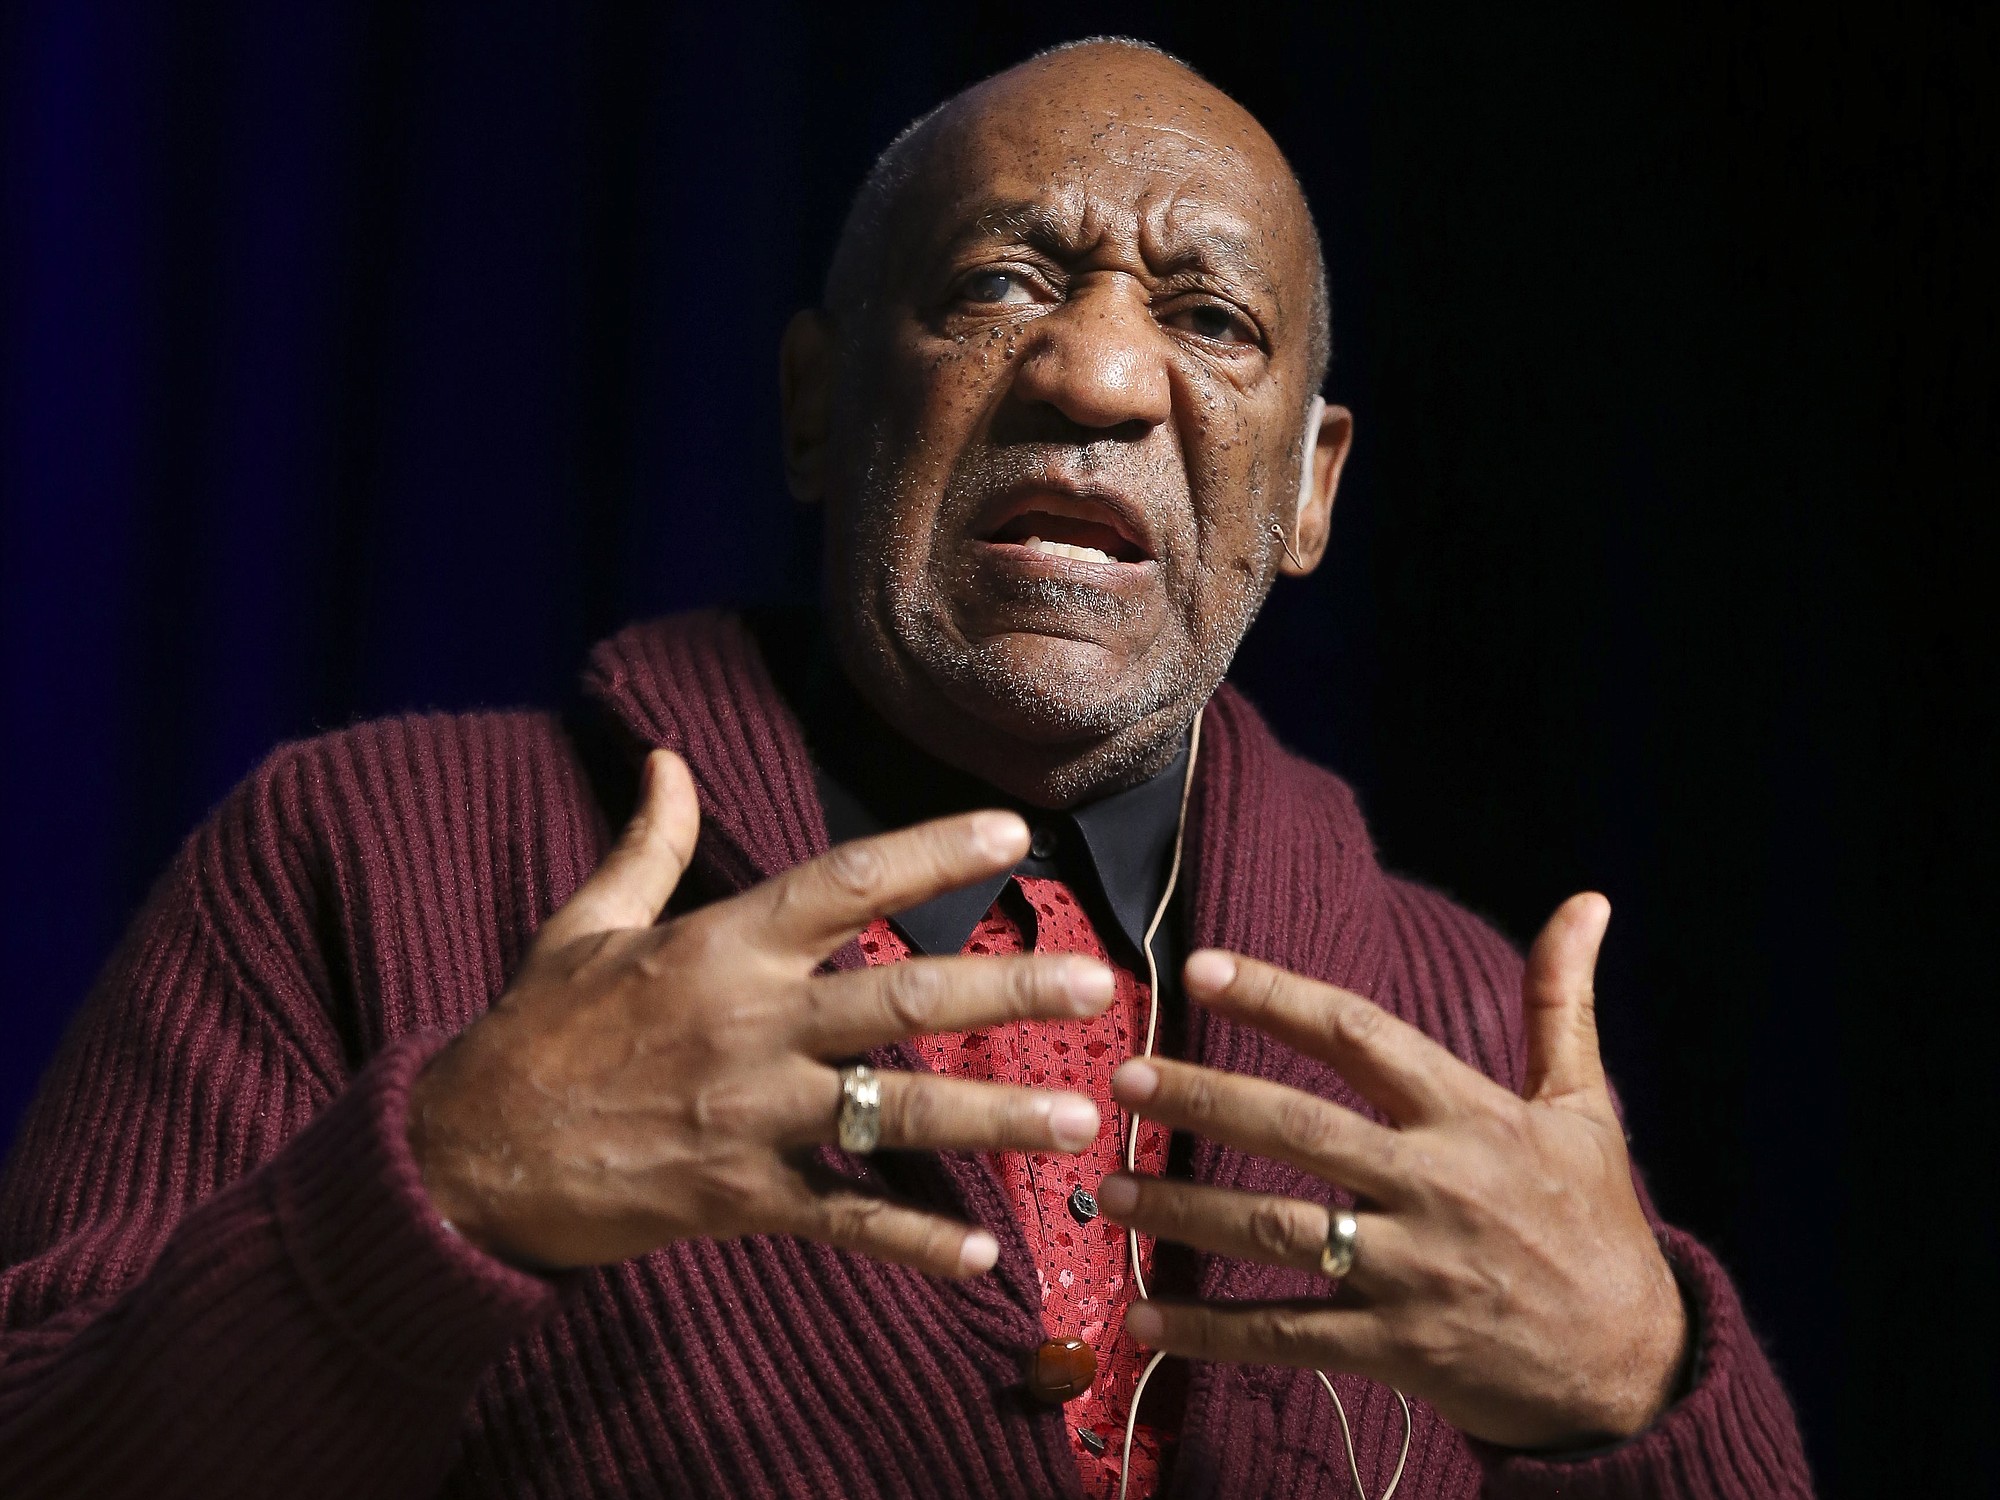 Comedian Bill Cosby performs at the Stand Up for Heroes event at Madison Square Garden, in New York.